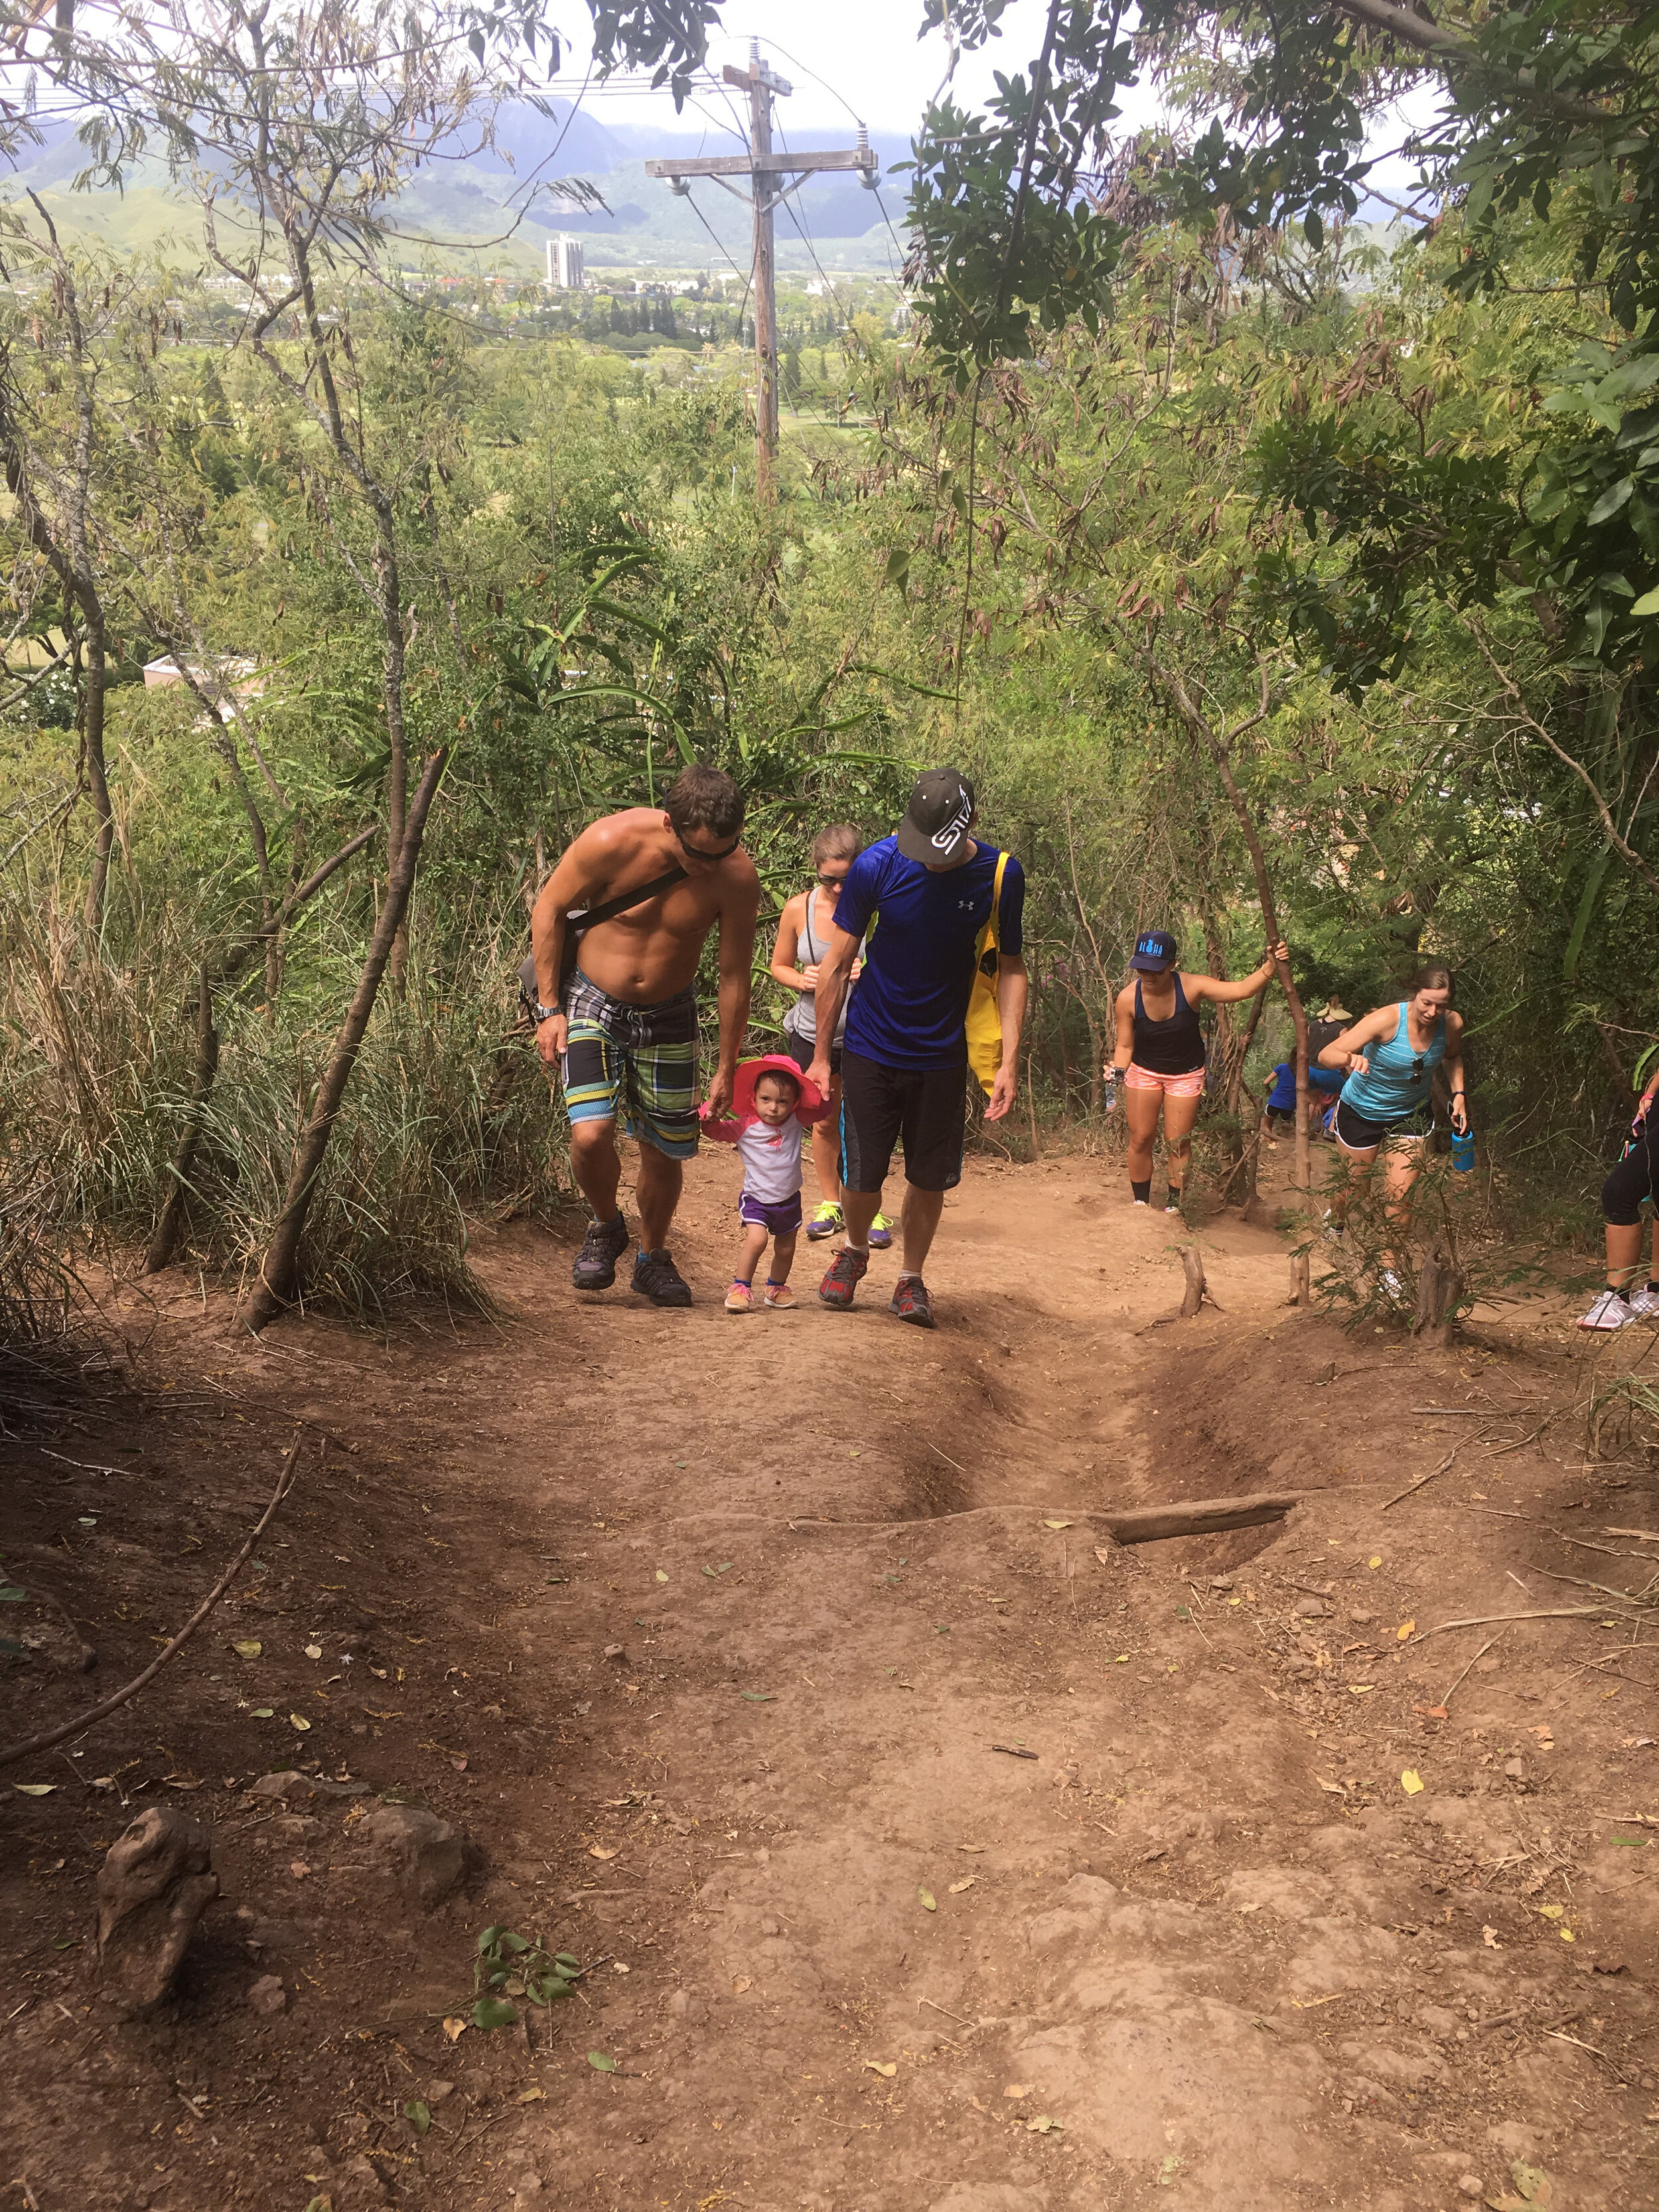 3 of the best kid friendly hikes on Oahu. Visit shortsweetmom.com to learn more about these must see locations or pin for later.